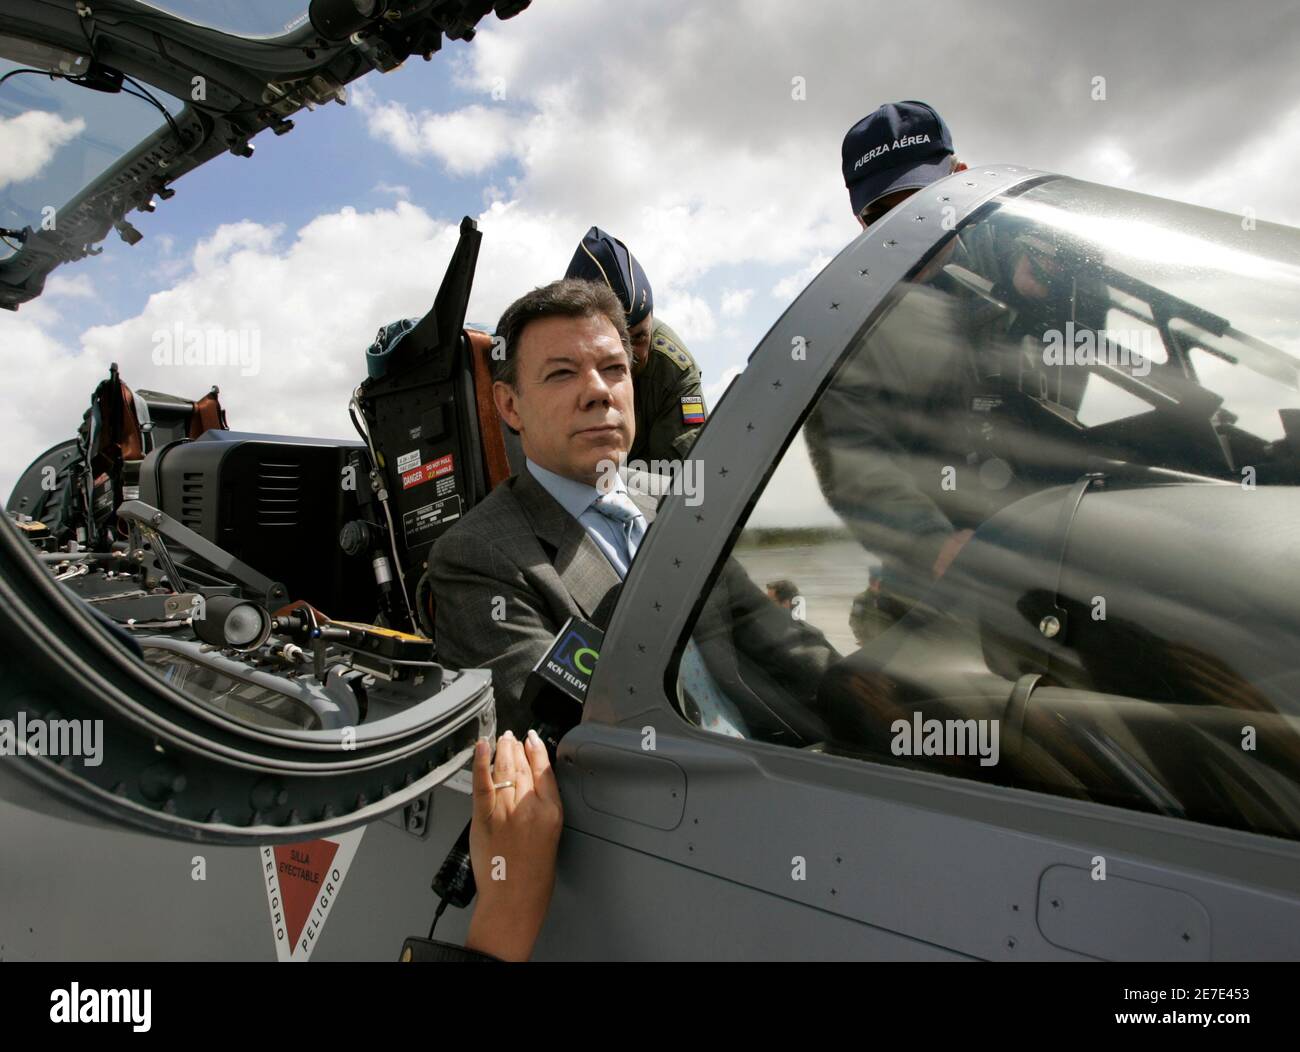 Colombia's Defense Minister Juan Manuel Santos receives instructions in a Tucano turboprop plane at Bogota's military airport of Catam, December 14, 2006. Brazil delivered three military planes in Colombia in a move that Colombia's biggest rebel group characterized as meddling in its four-decade fight to establish a socialist state. The Super Tucano turboprop planes, made by Embraer, are part of a bigger order of 25 aircraft worth $235 million.  REUTERS/Jose Miguel Gomez         (COLOMBIA) Stock Photo